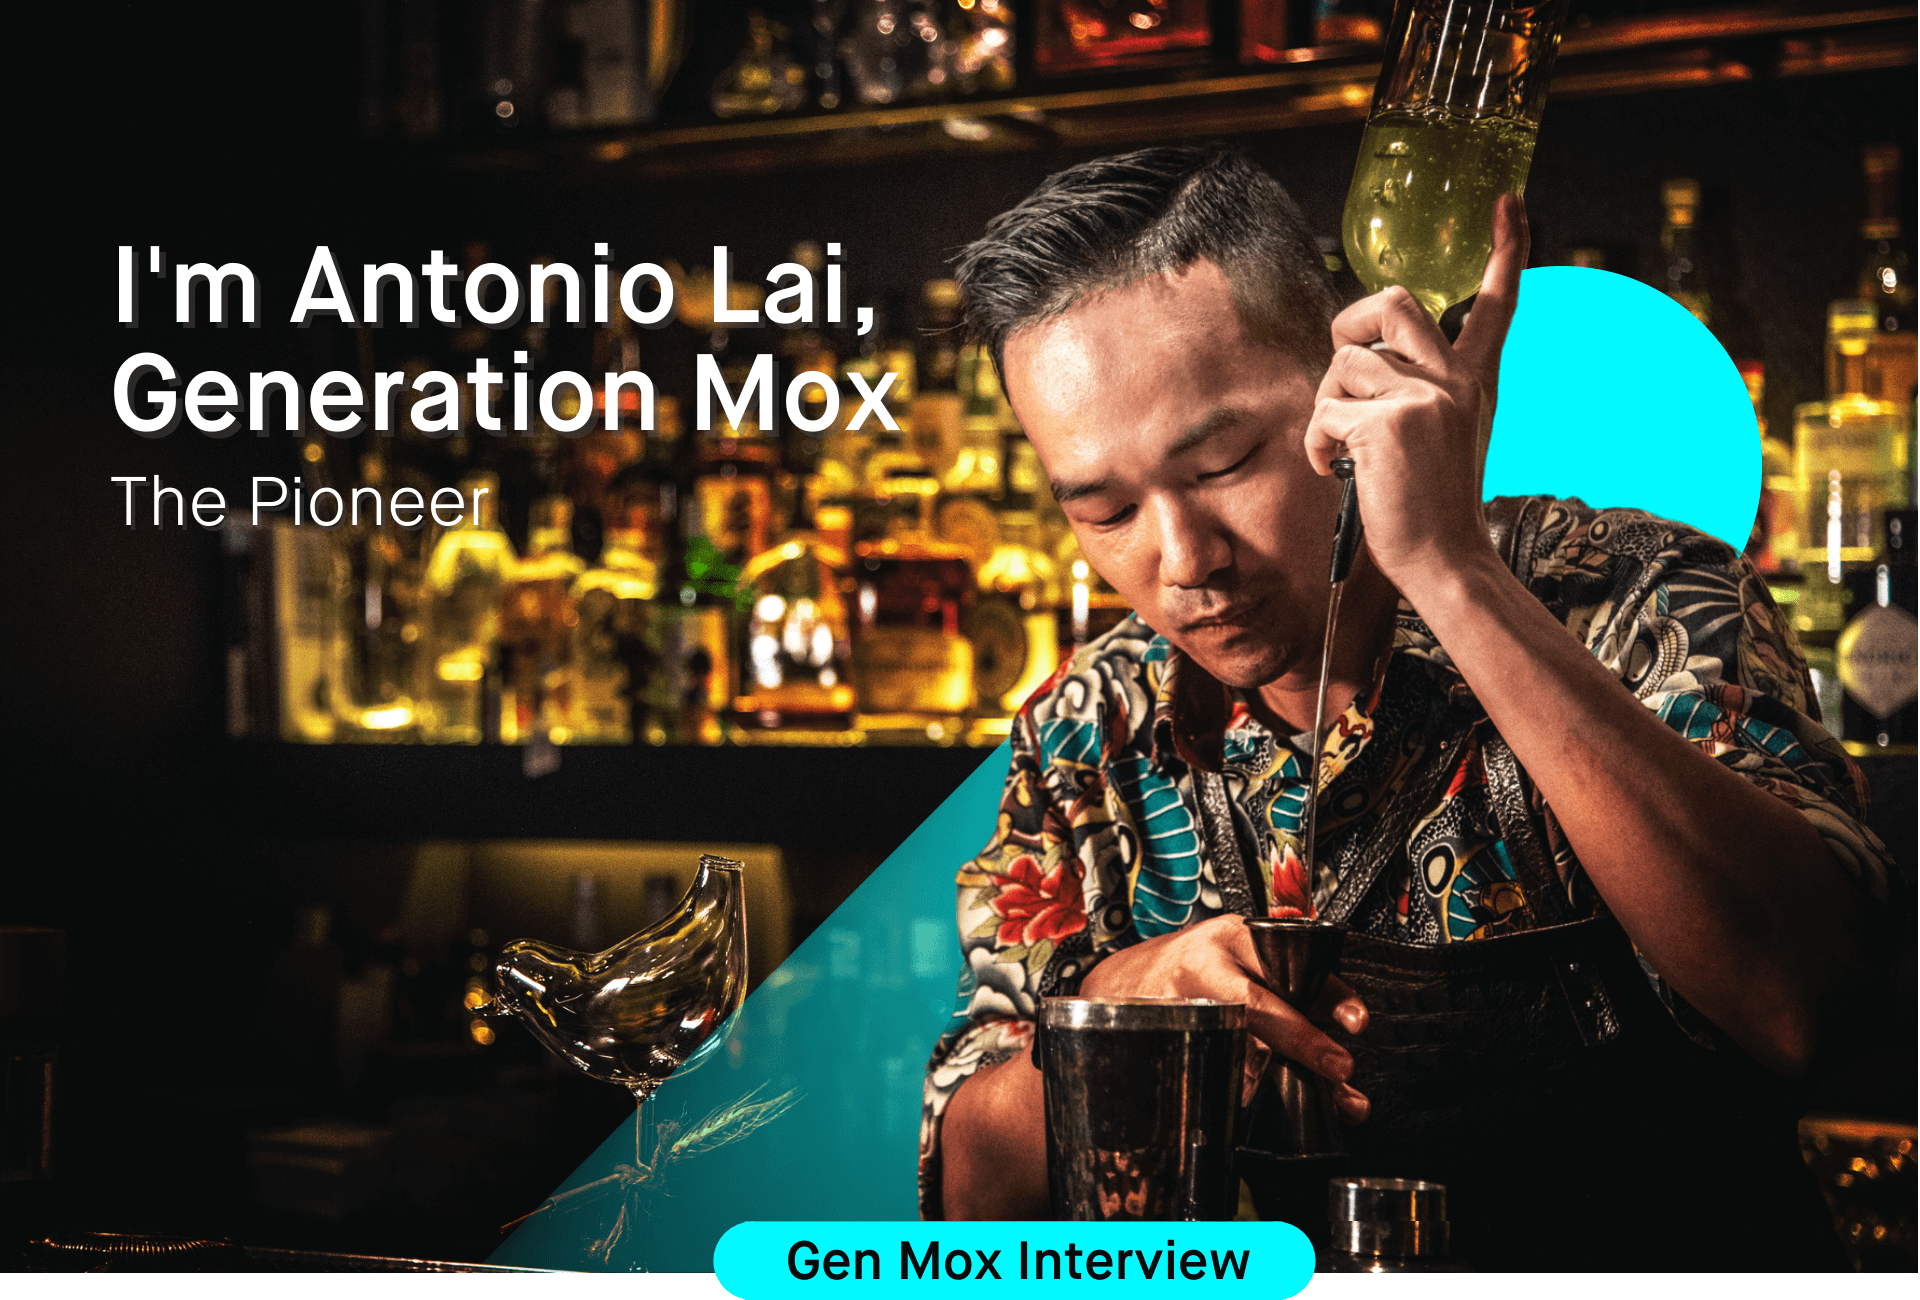 10 Questions with Antonio Lai, Mixologist & Owner of Quinary, ORI-GIN, VEA & More  